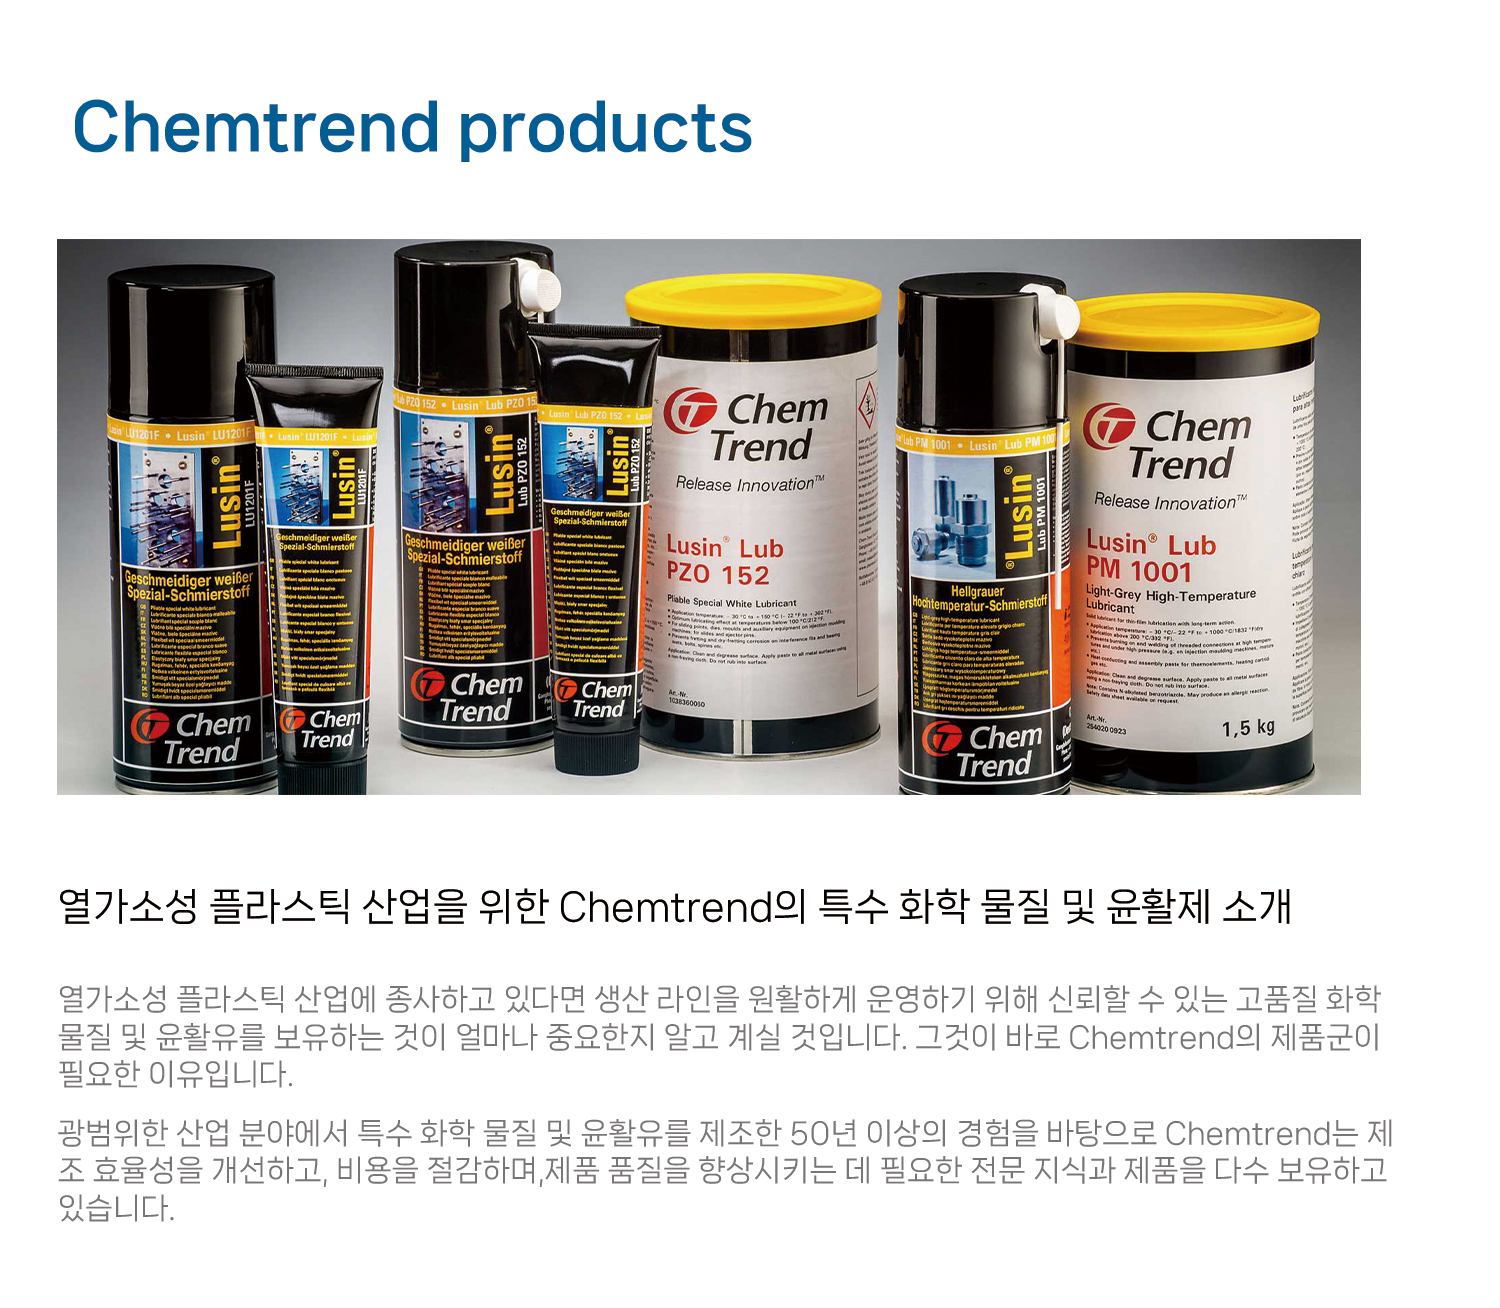 1.Chemtrend items